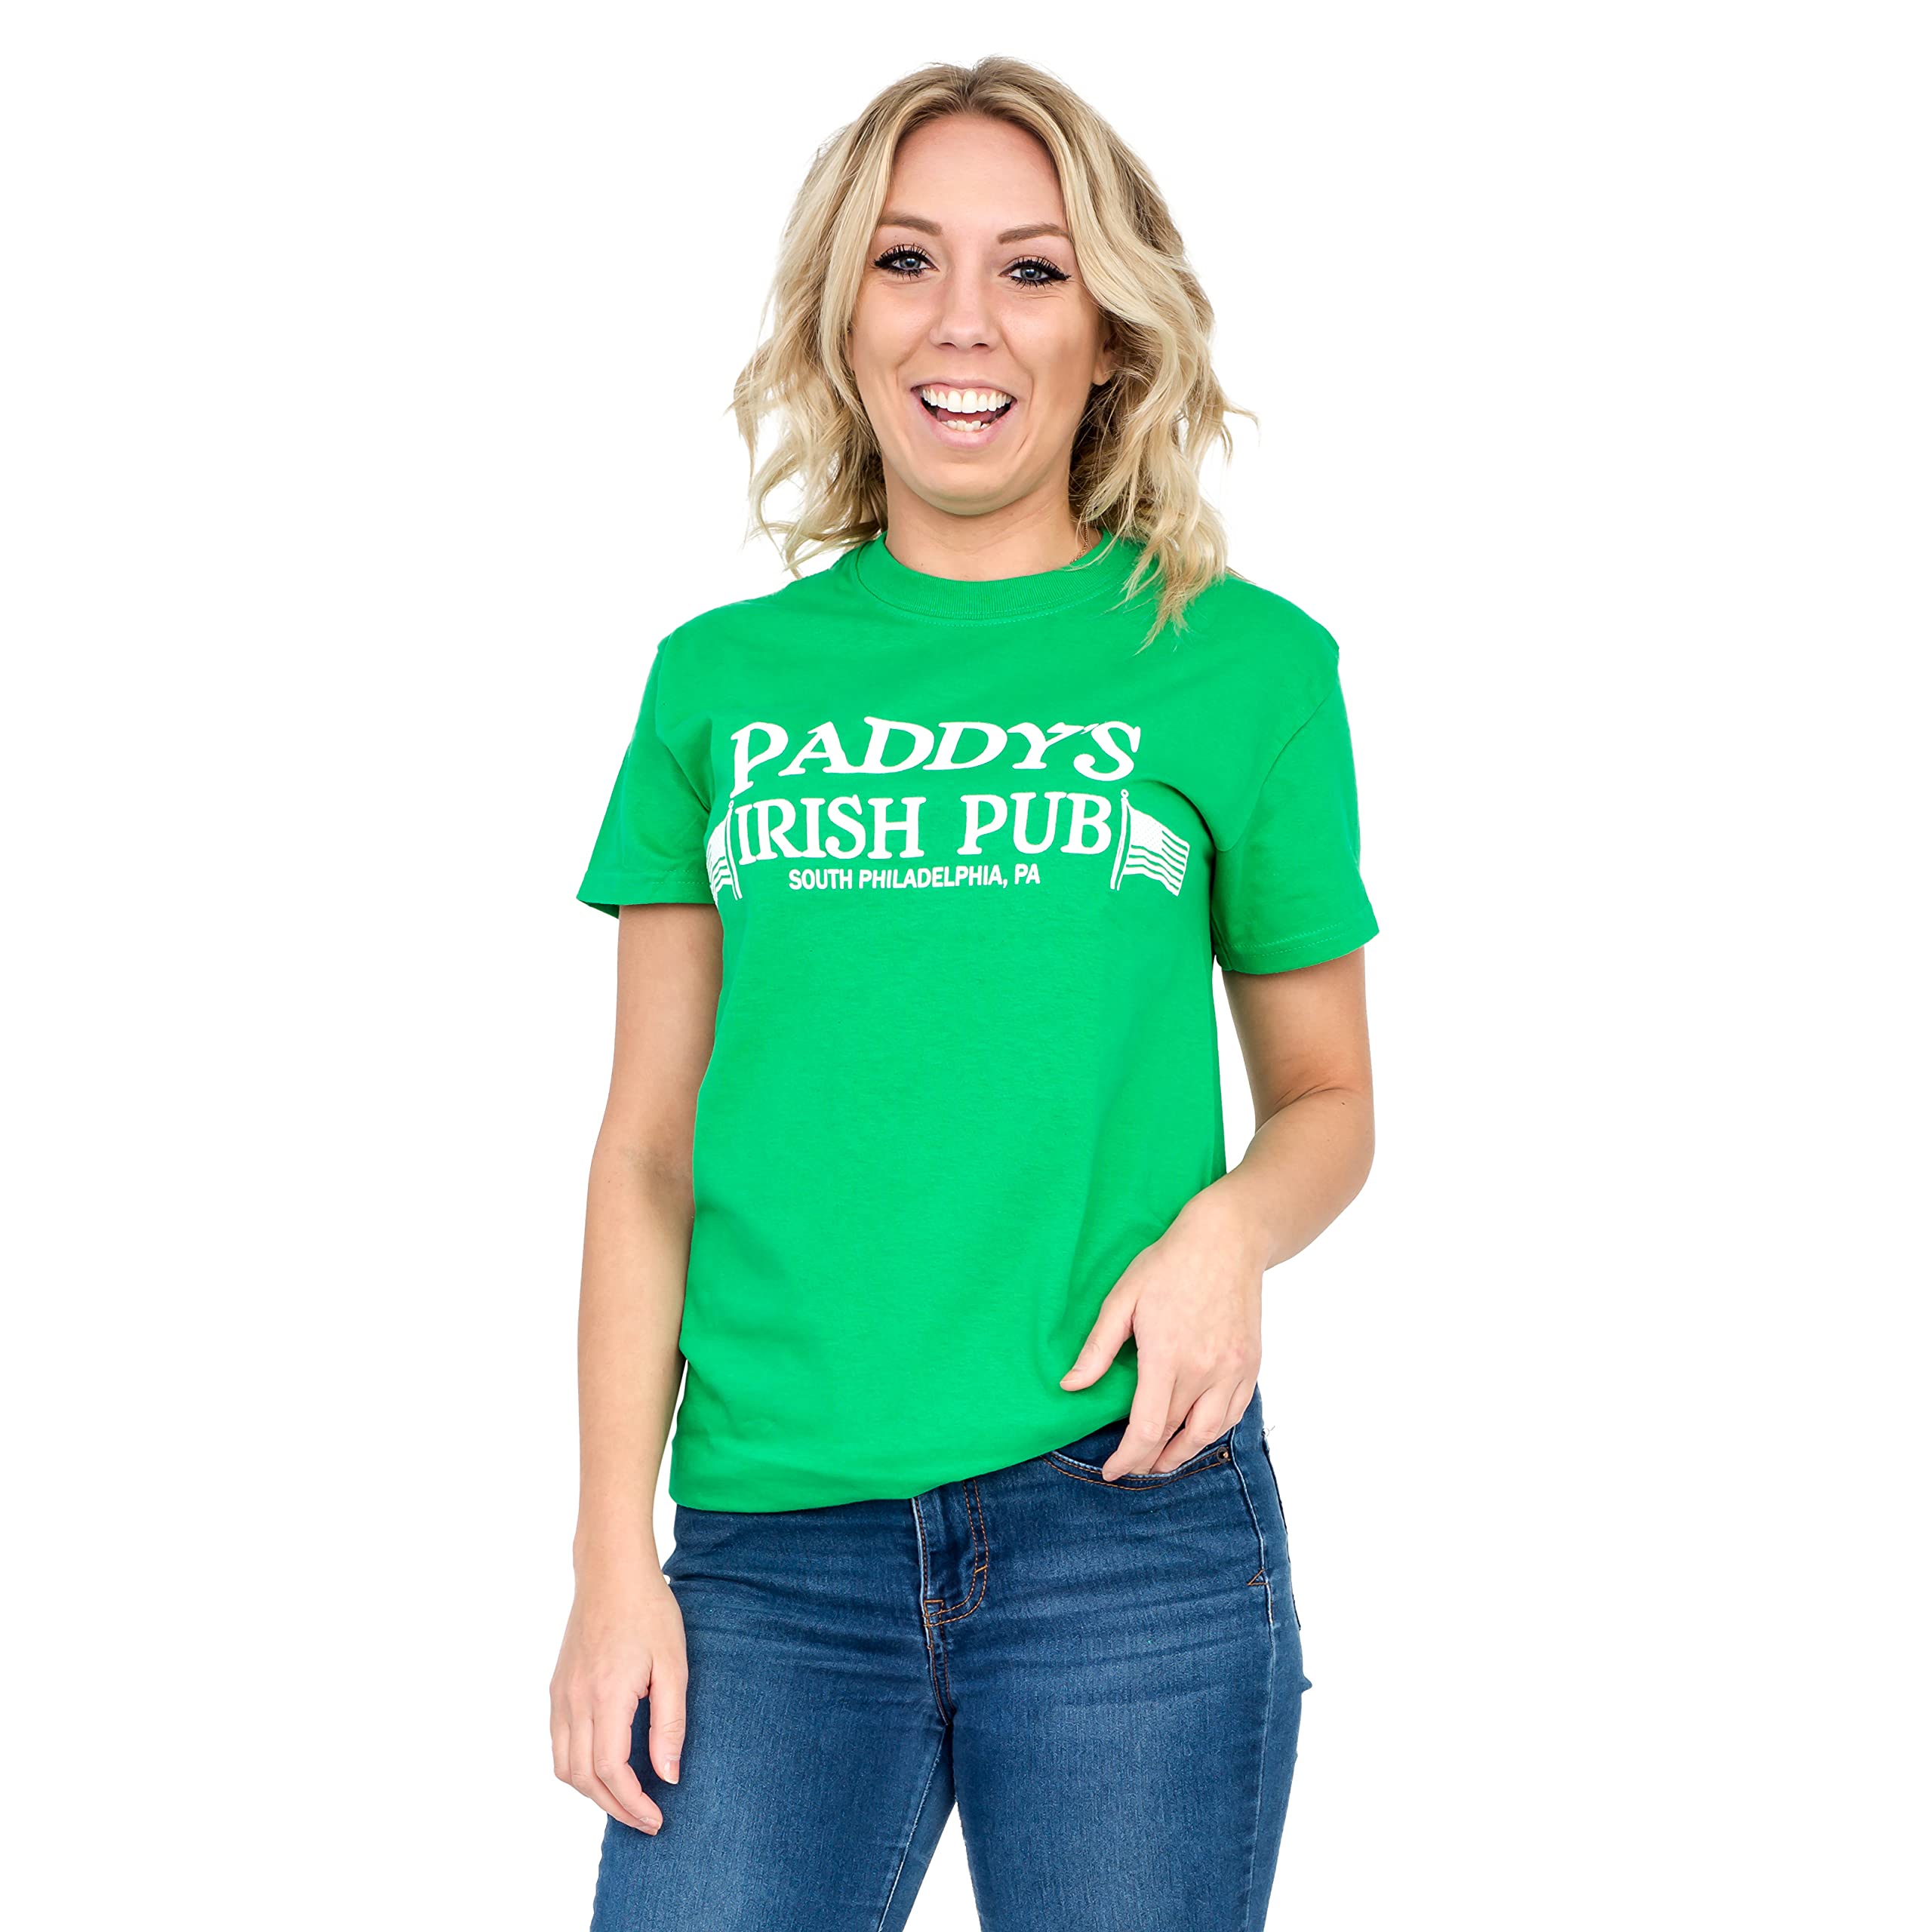 It's Always Sunny in Philadelphia Paddy's Irish Pub Adult TV T-Shirt Officially Licensed by Ripple Junction